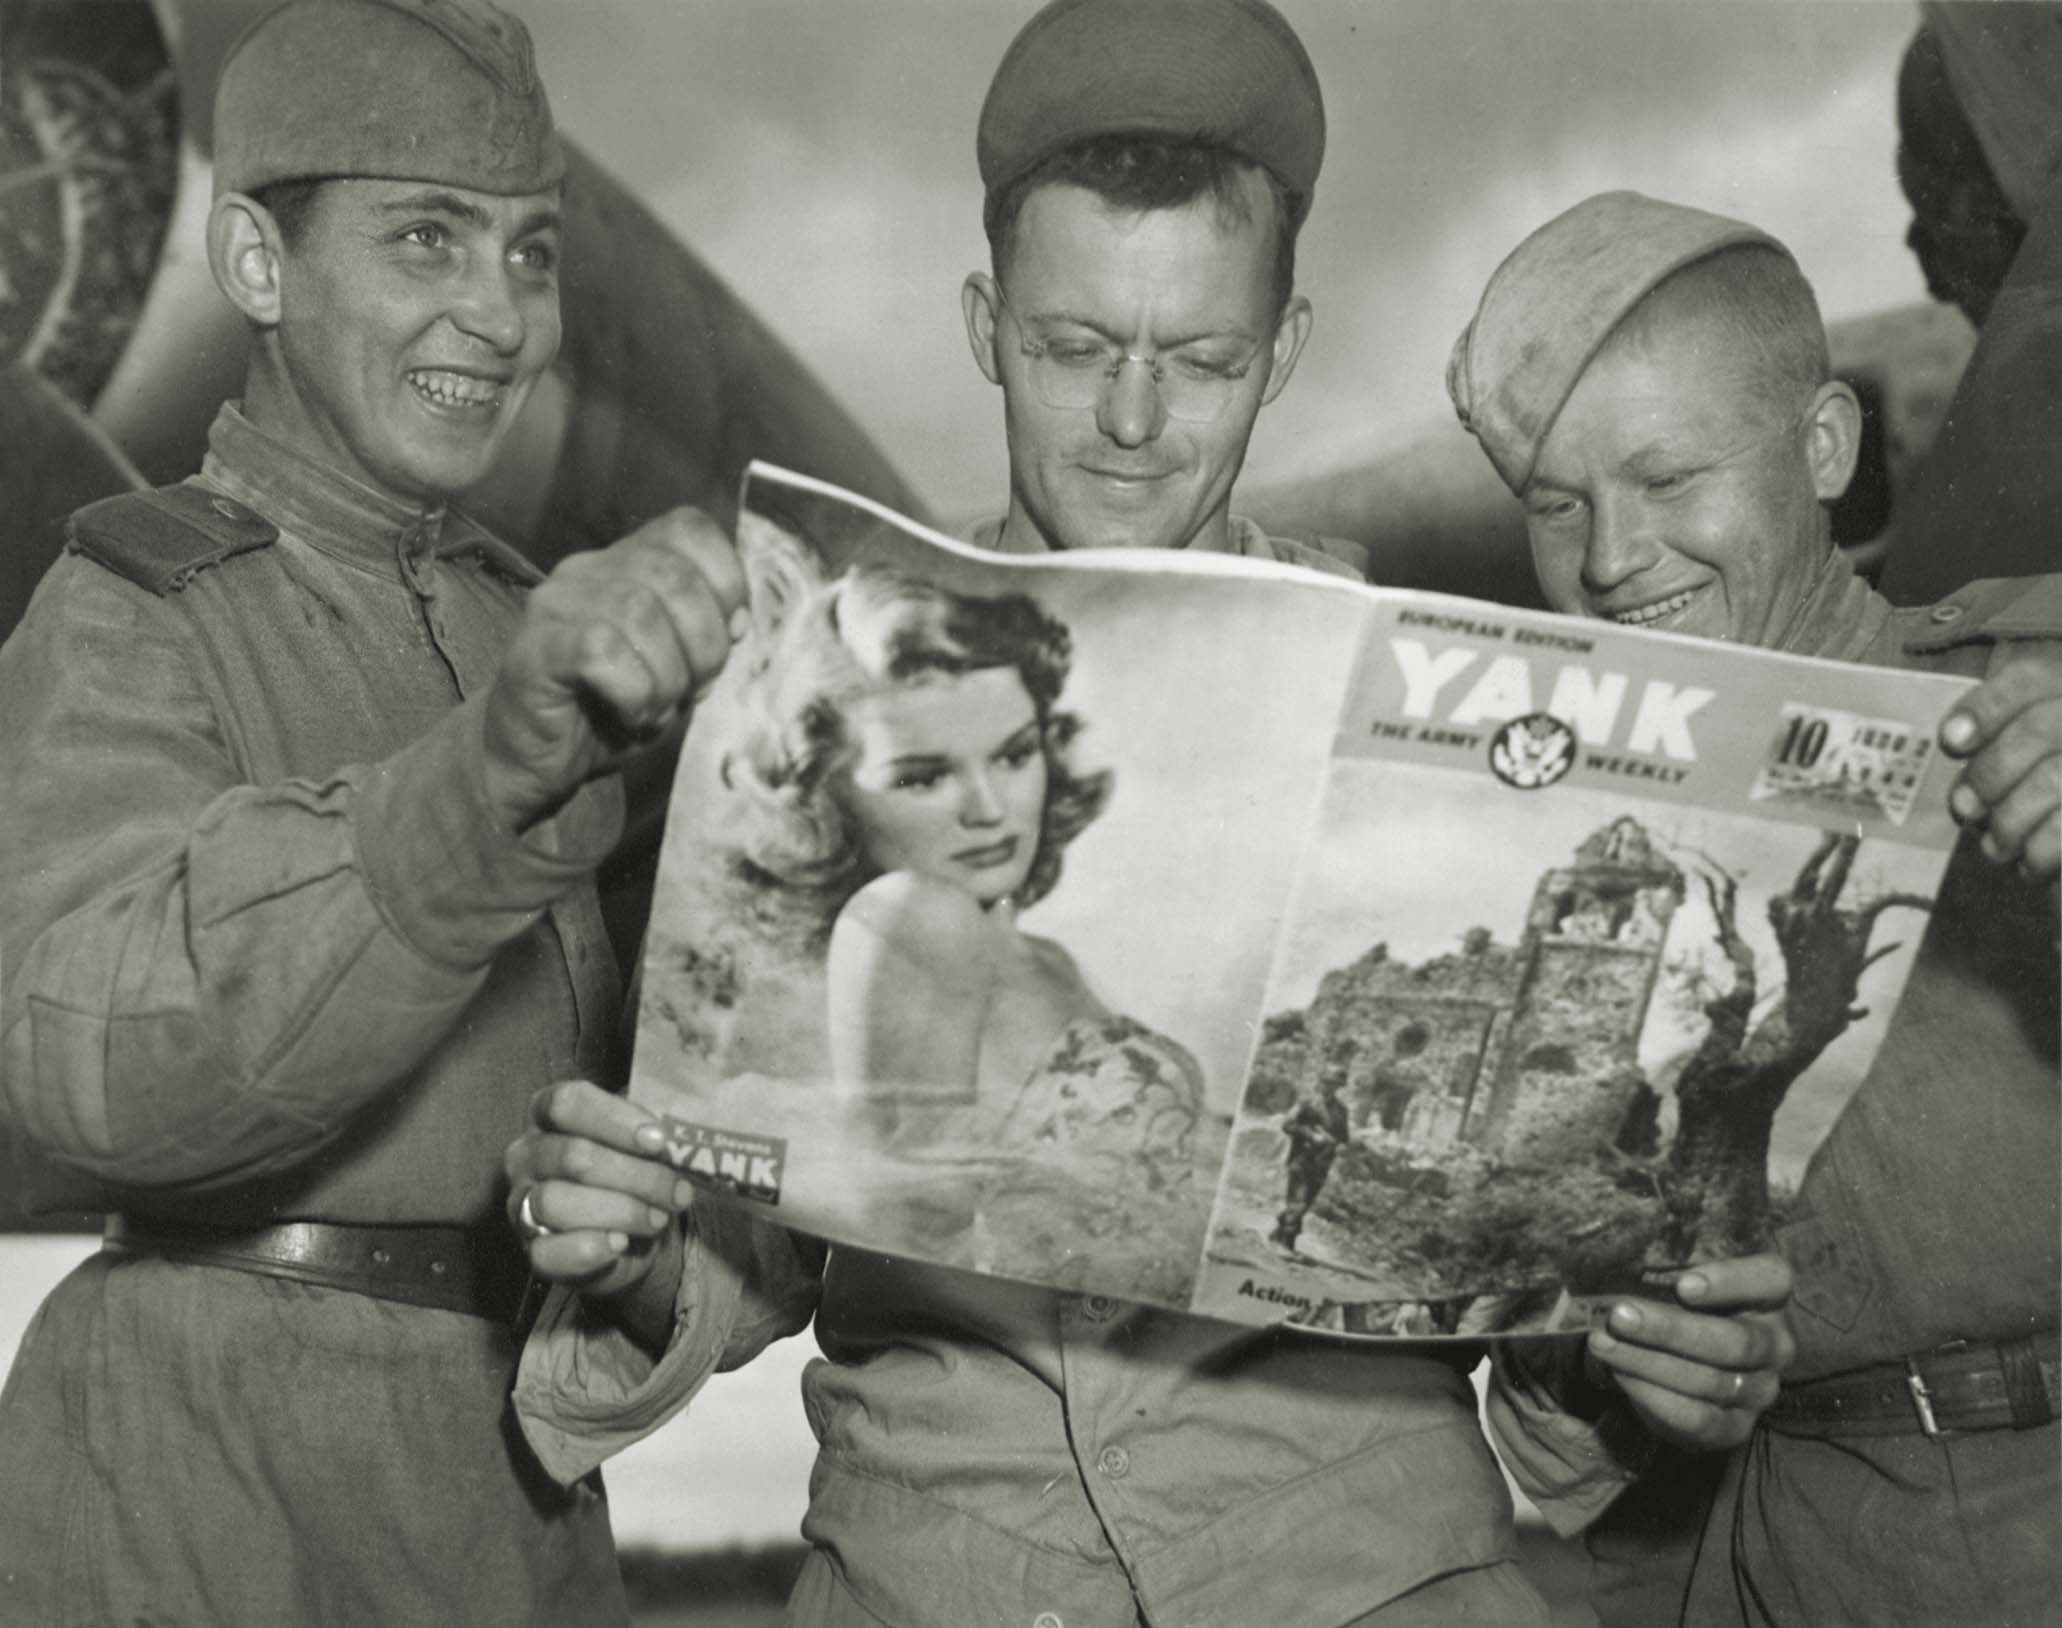 Shared copies of Yank were popular with Allied service members, though their obvious enthusiasm may have landed these flanking Russian soldiers in hot water. / National Archives